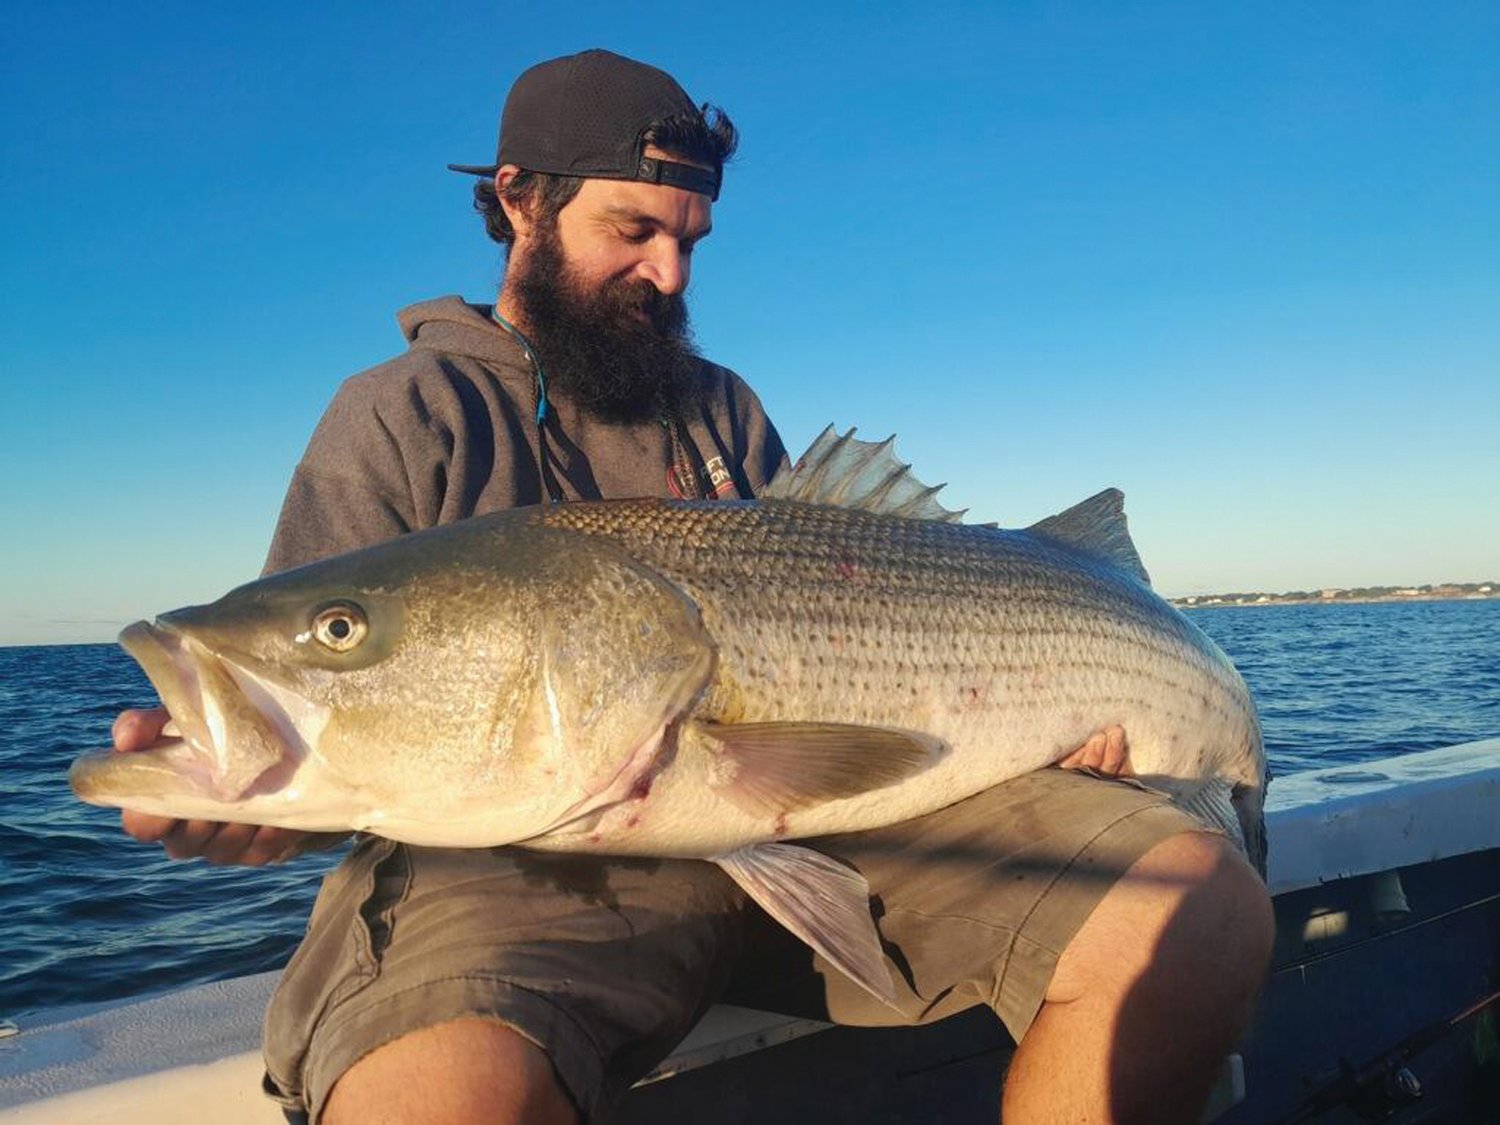 STRIPED BASS: Jeff Sullivan, an associate at Lucky Bait & Tackle, Warren, with the 53-pound striped bass and caught and released off Newport this weekend using a top water lure. (Submitted photos)